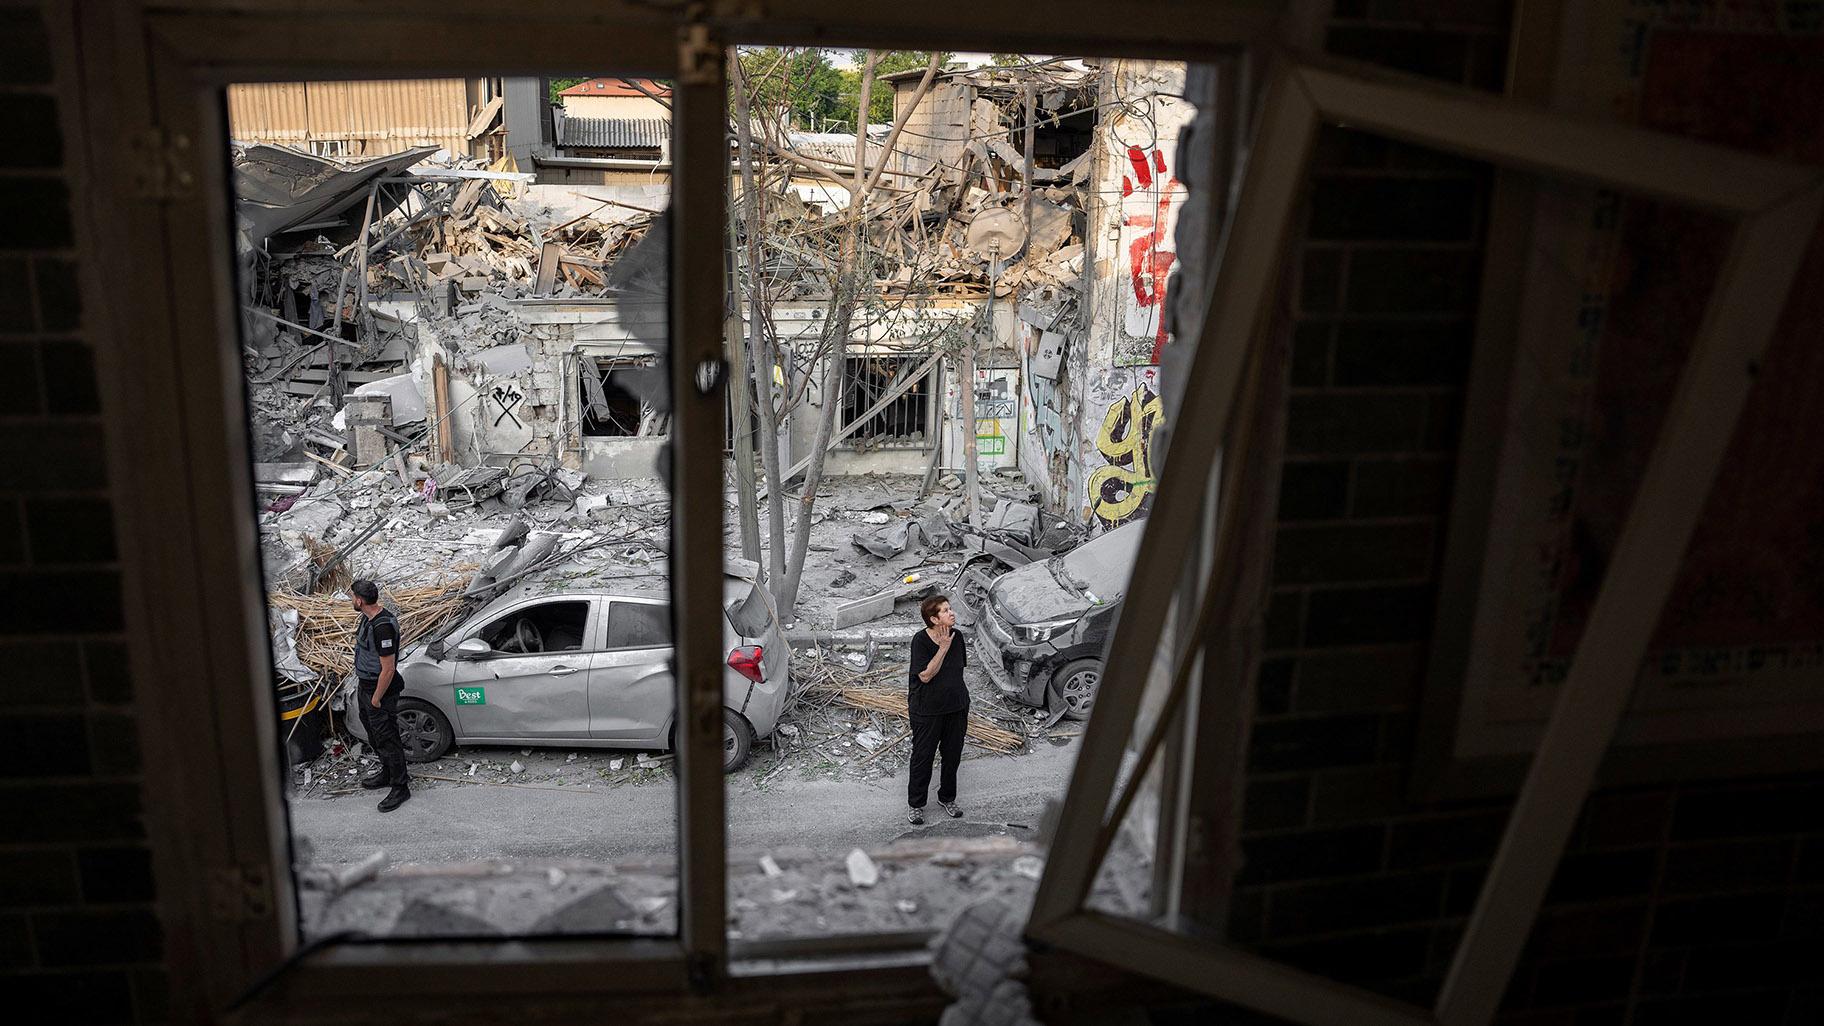 Israelis inspect the rubble of a building a day after it was hit by a rocket fired from the Gaza Strip, in Tel Aviv, Israel, on Sunday. (Oded Balilty / AP)